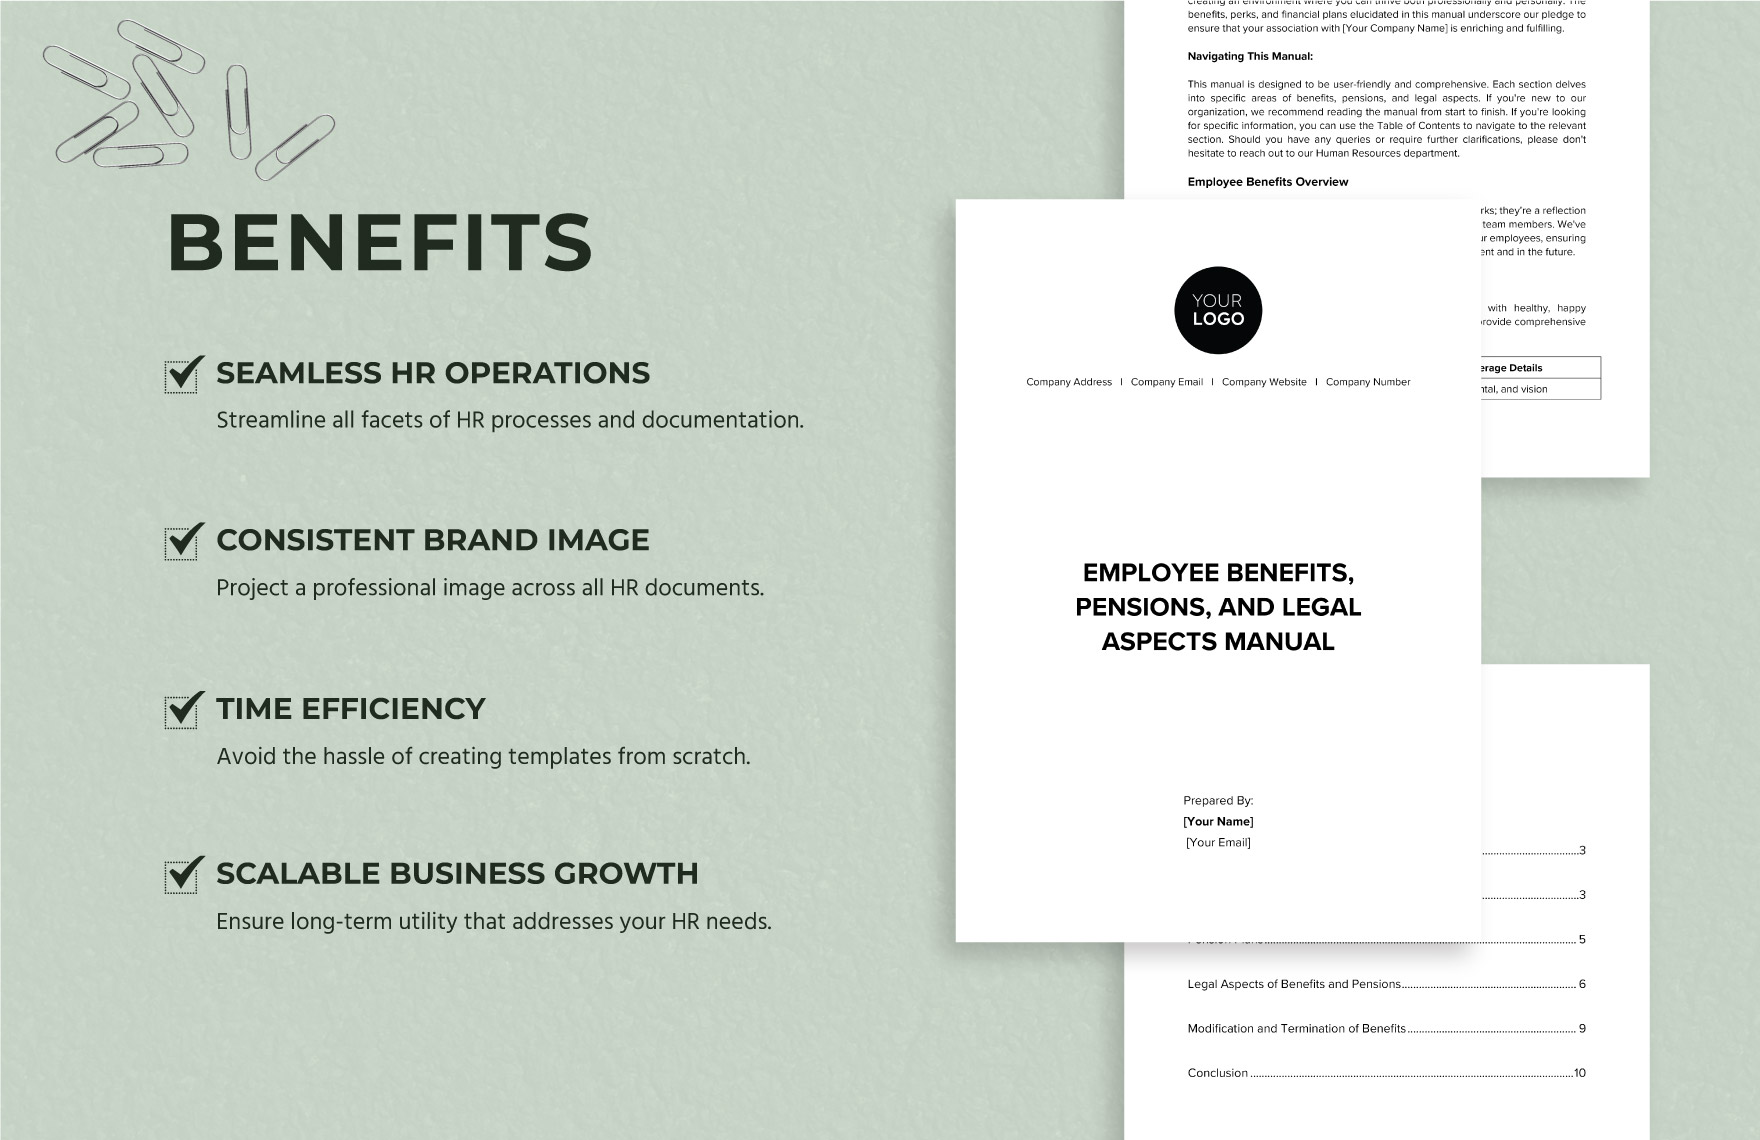 Employee Benefits, Pensions, and Legal Aspects Manual HR Template